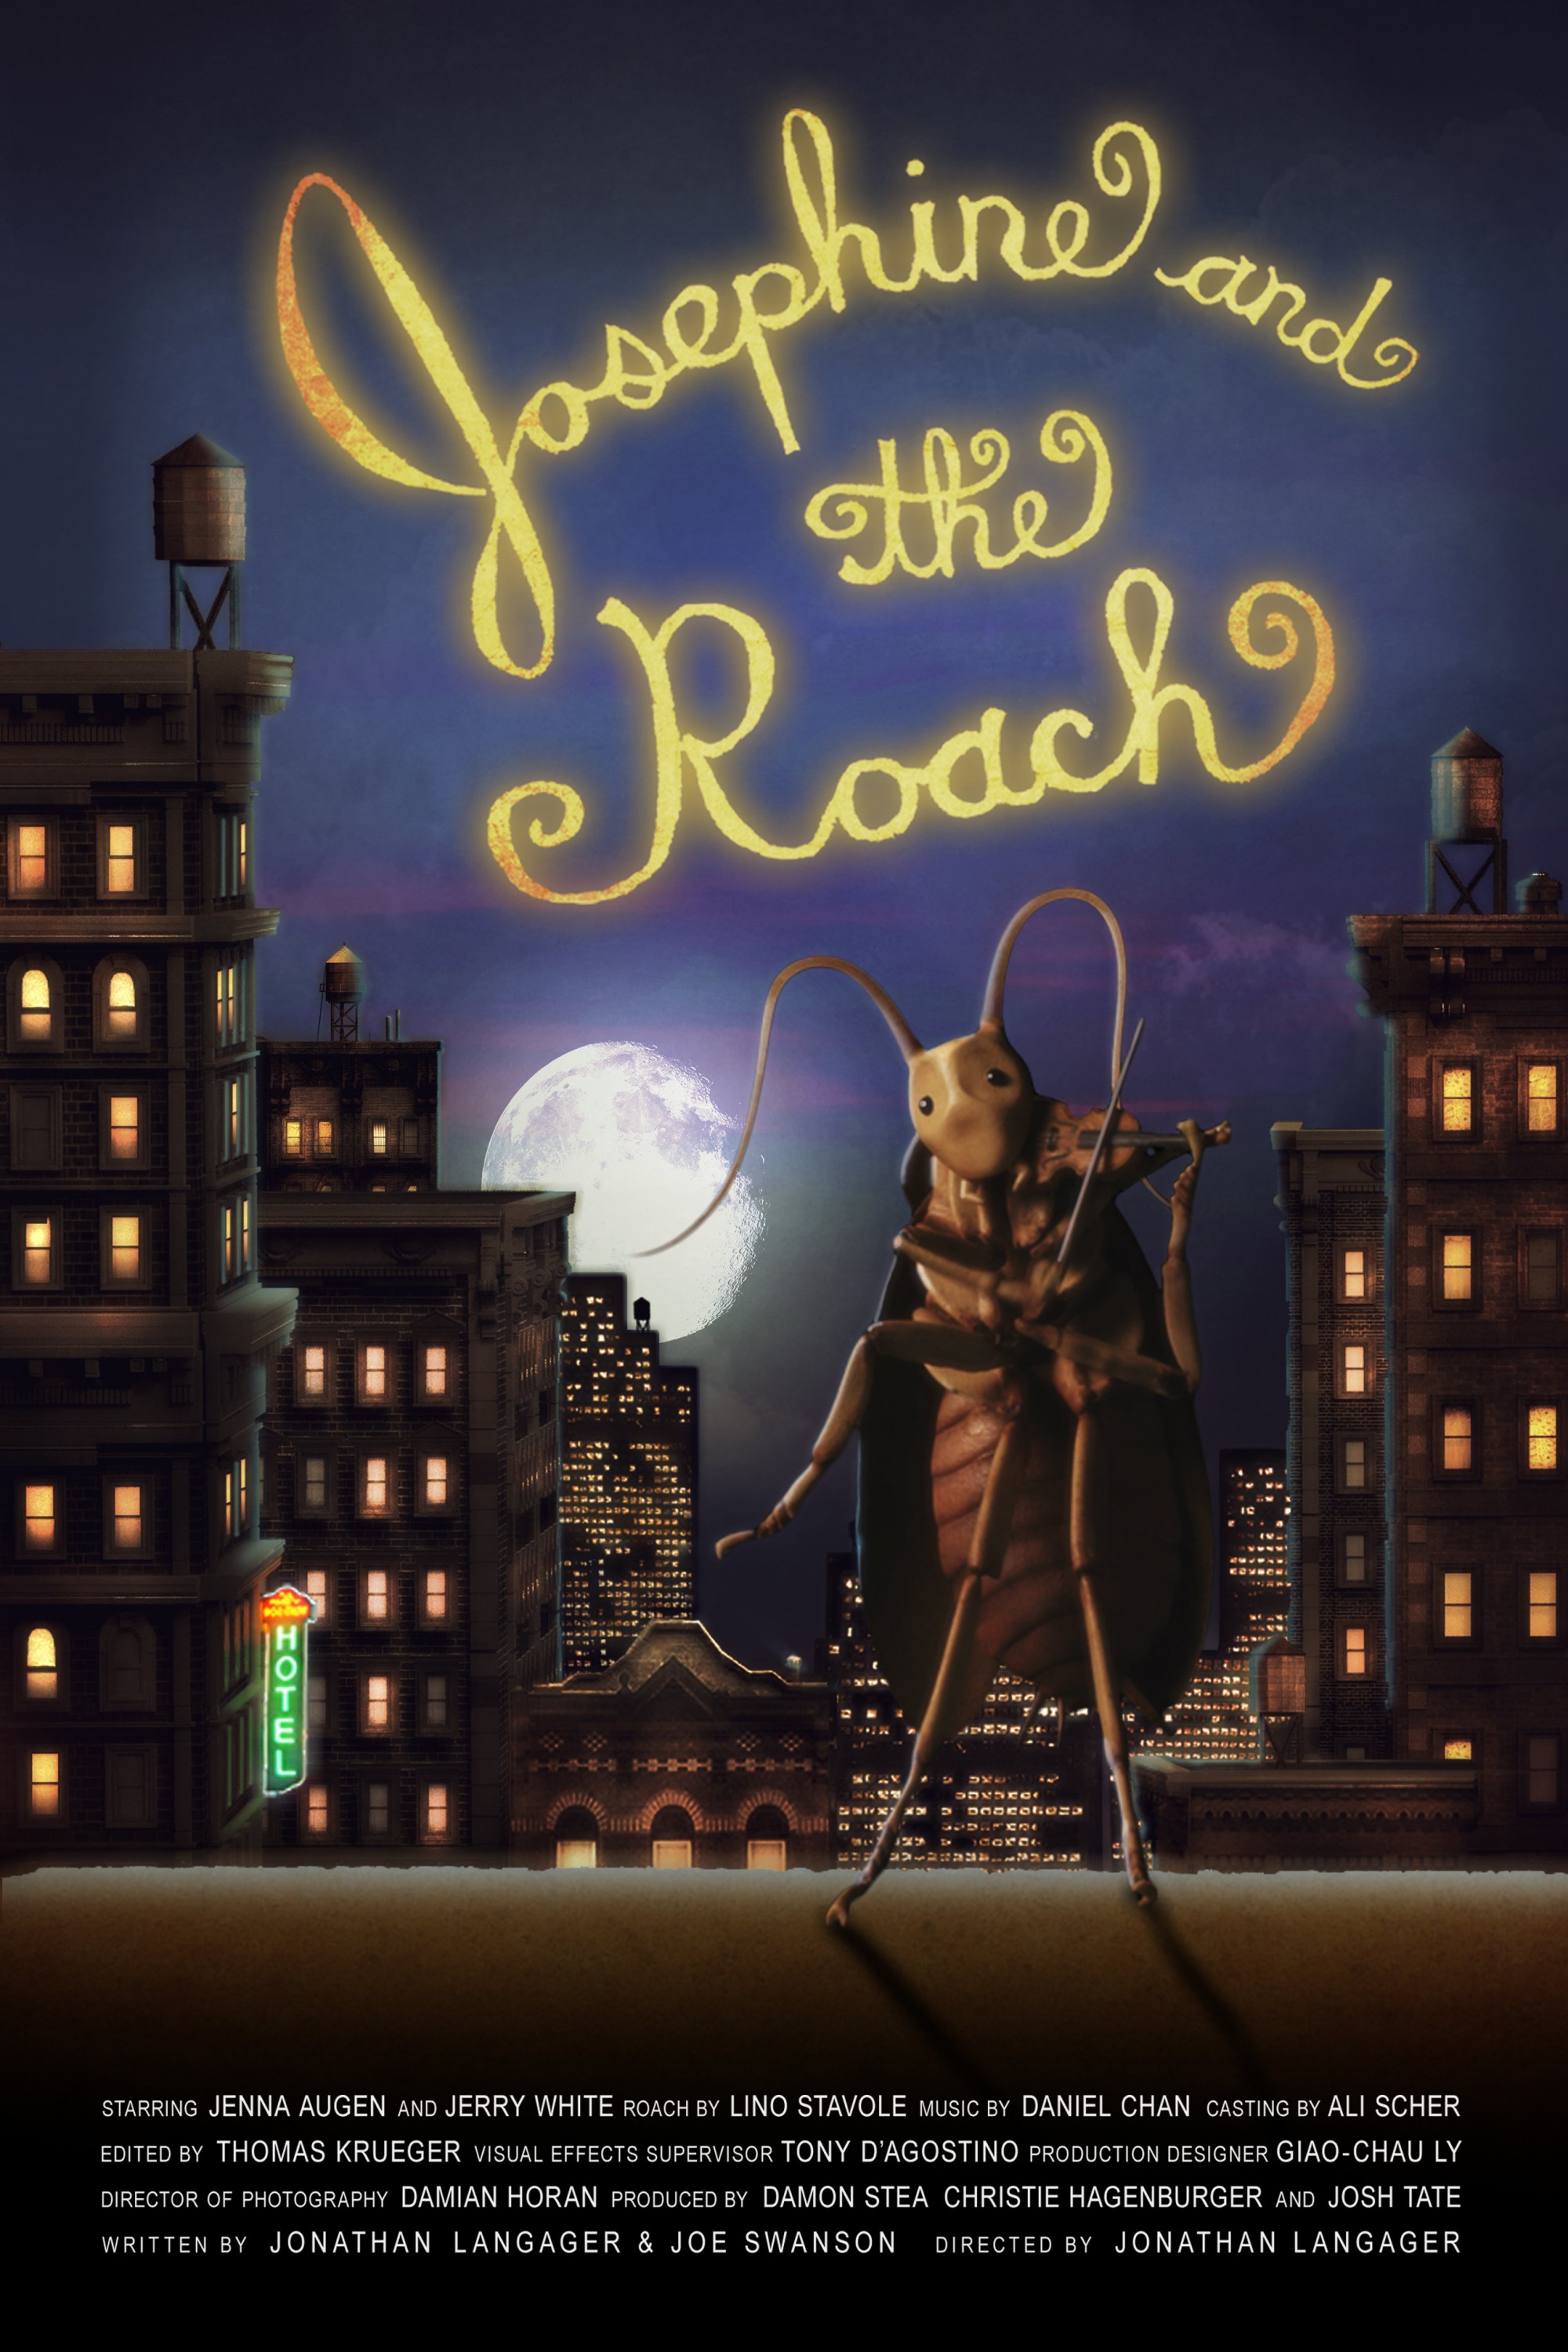 Mega Sized Movie Poster Image for Josephine and the Roach